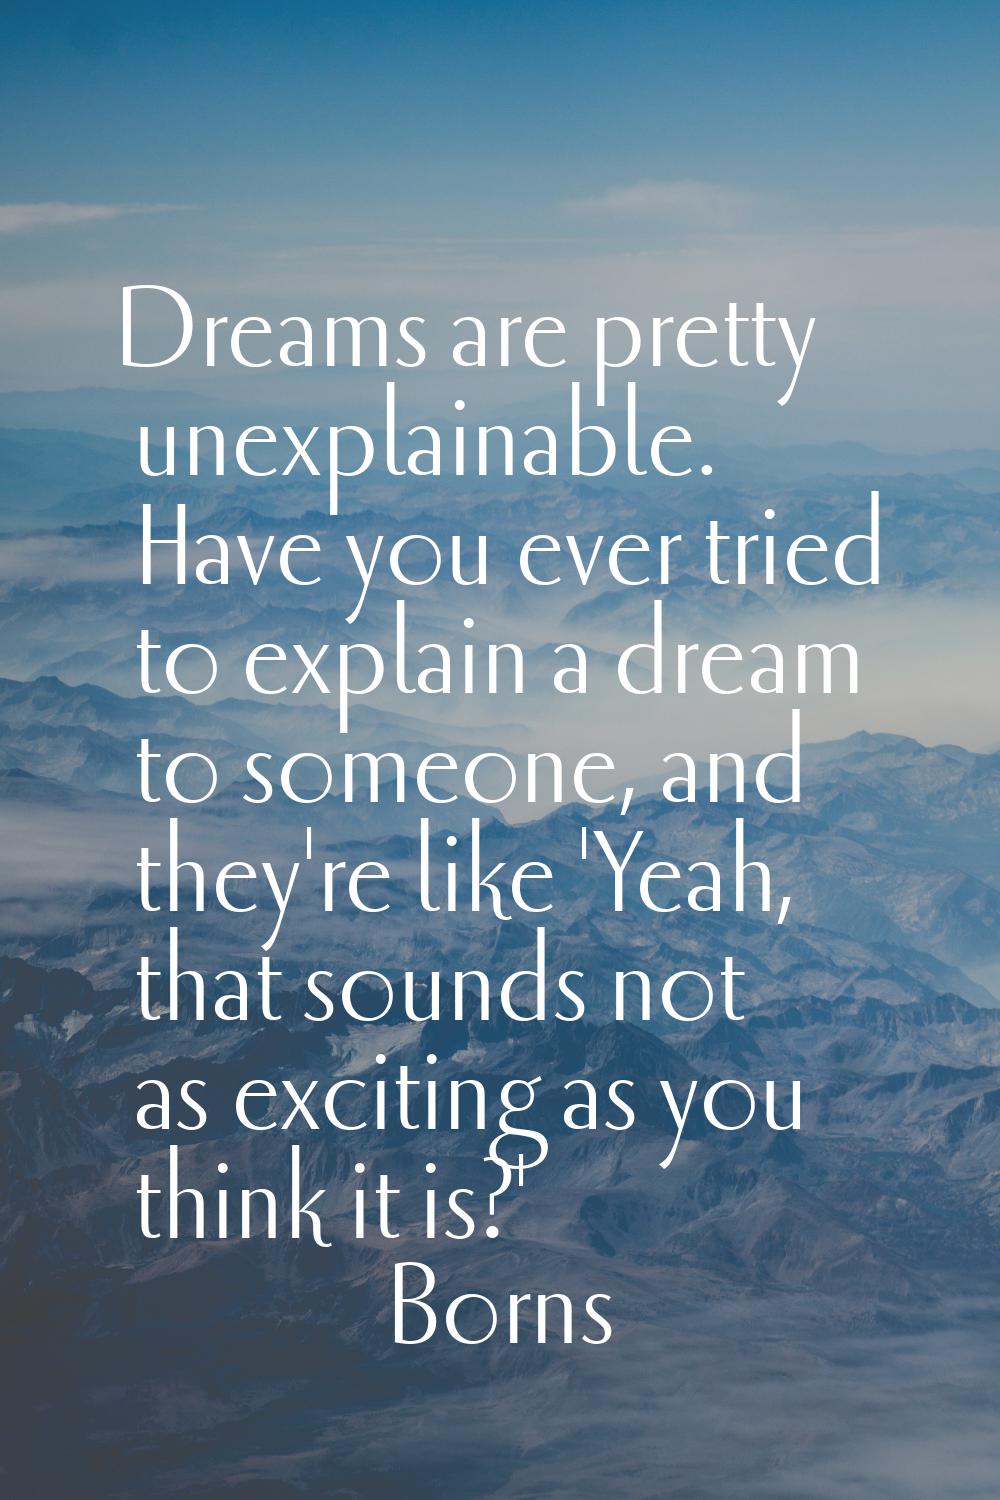 Dreams are pretty unexplainable. Have you ever tried to explain a dream to someone, and they're lik